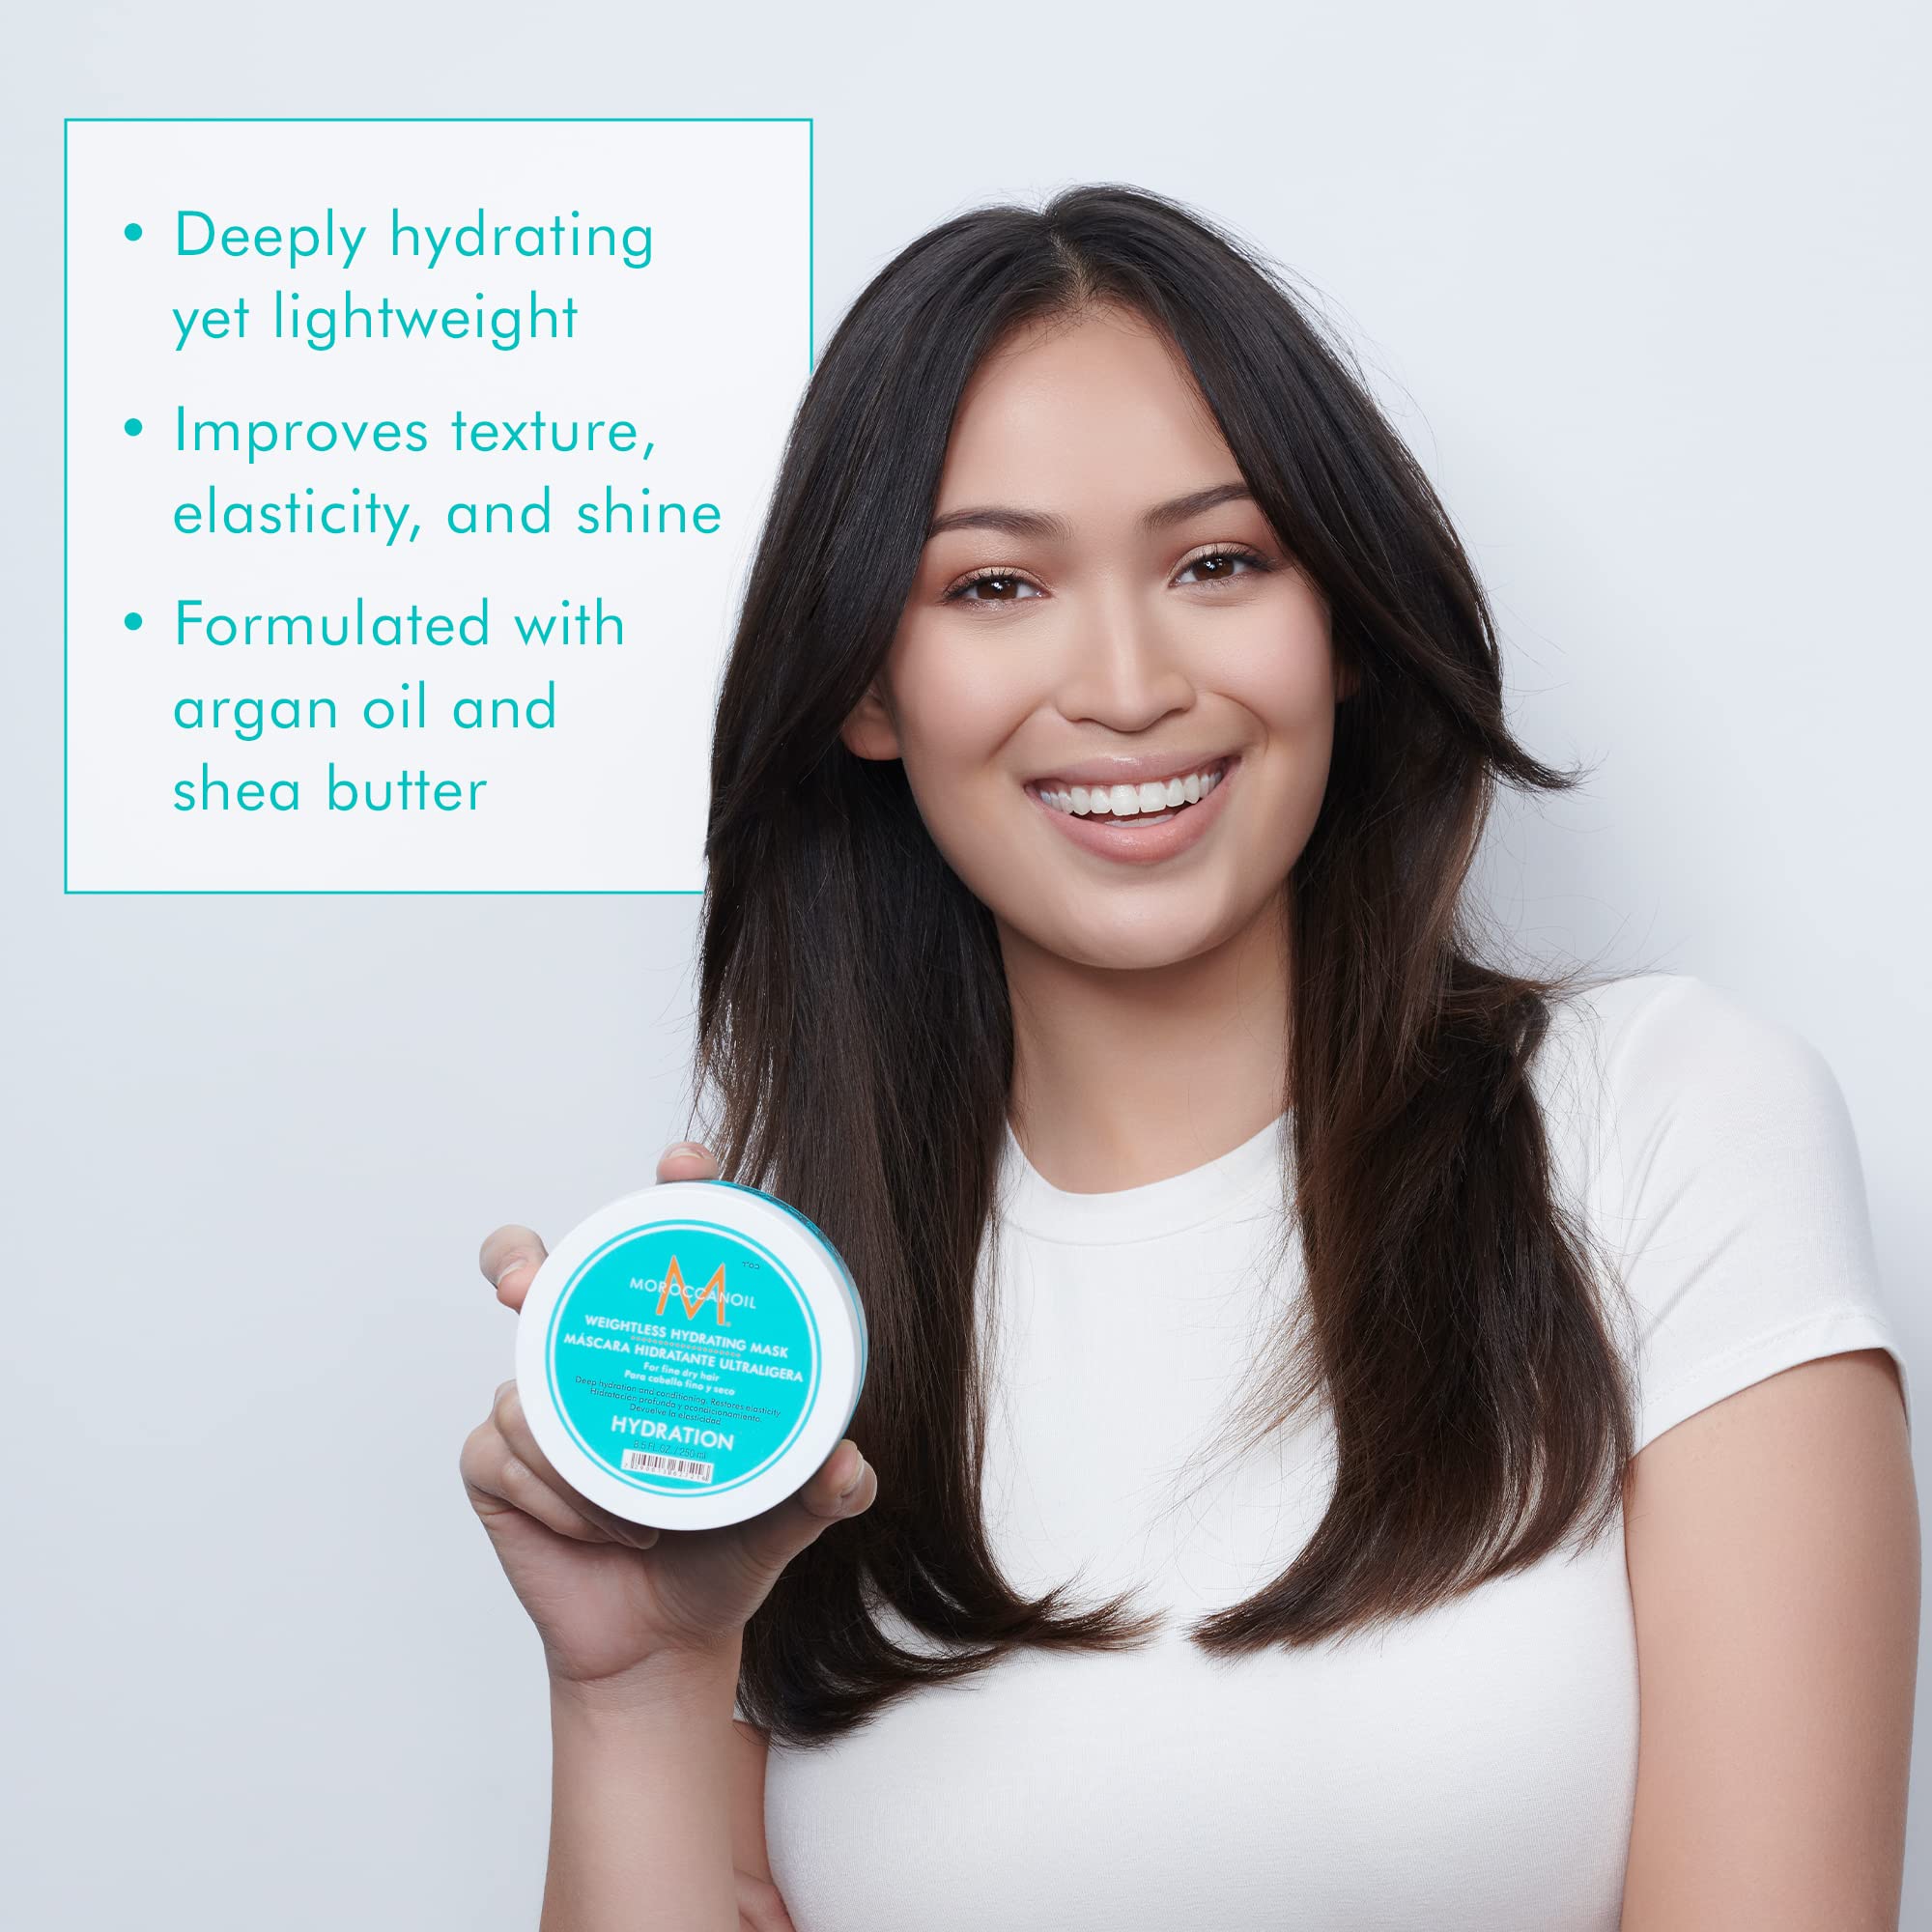 Moroccanoil Weightless Hydrating Hair Mask